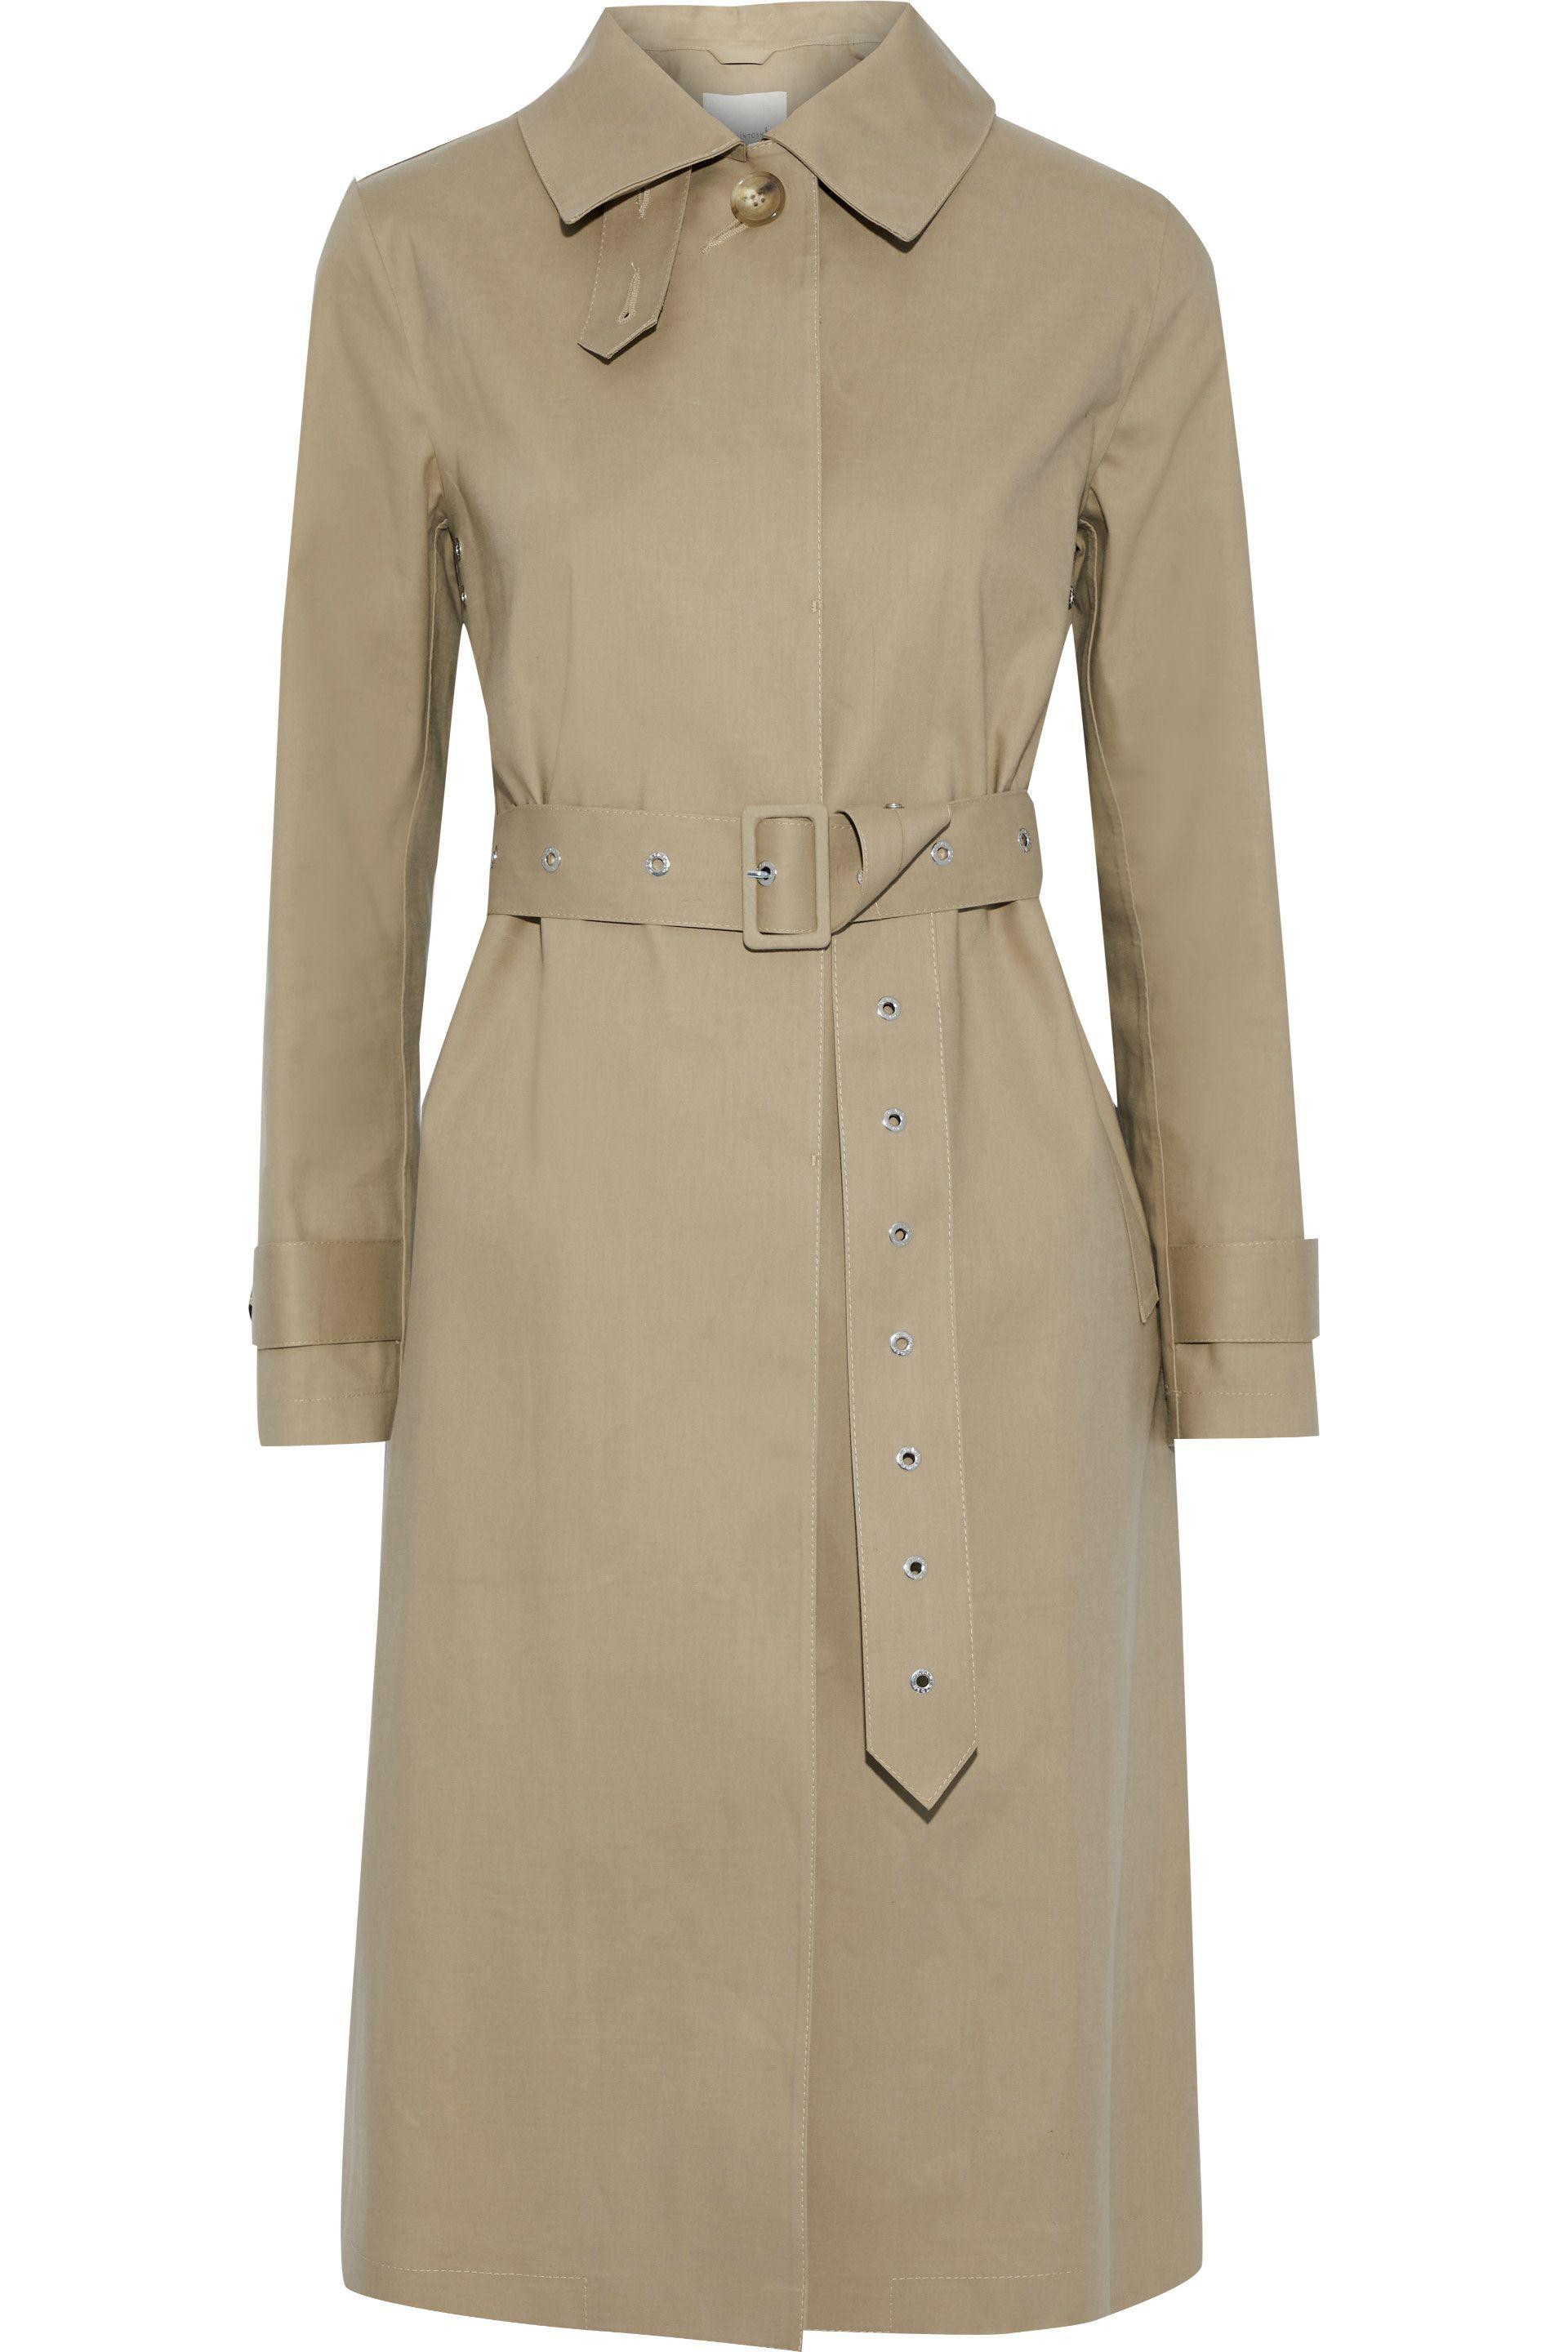 Mackintosh Bonded Cotton Trench Coat Neutral in Natural - Lyst